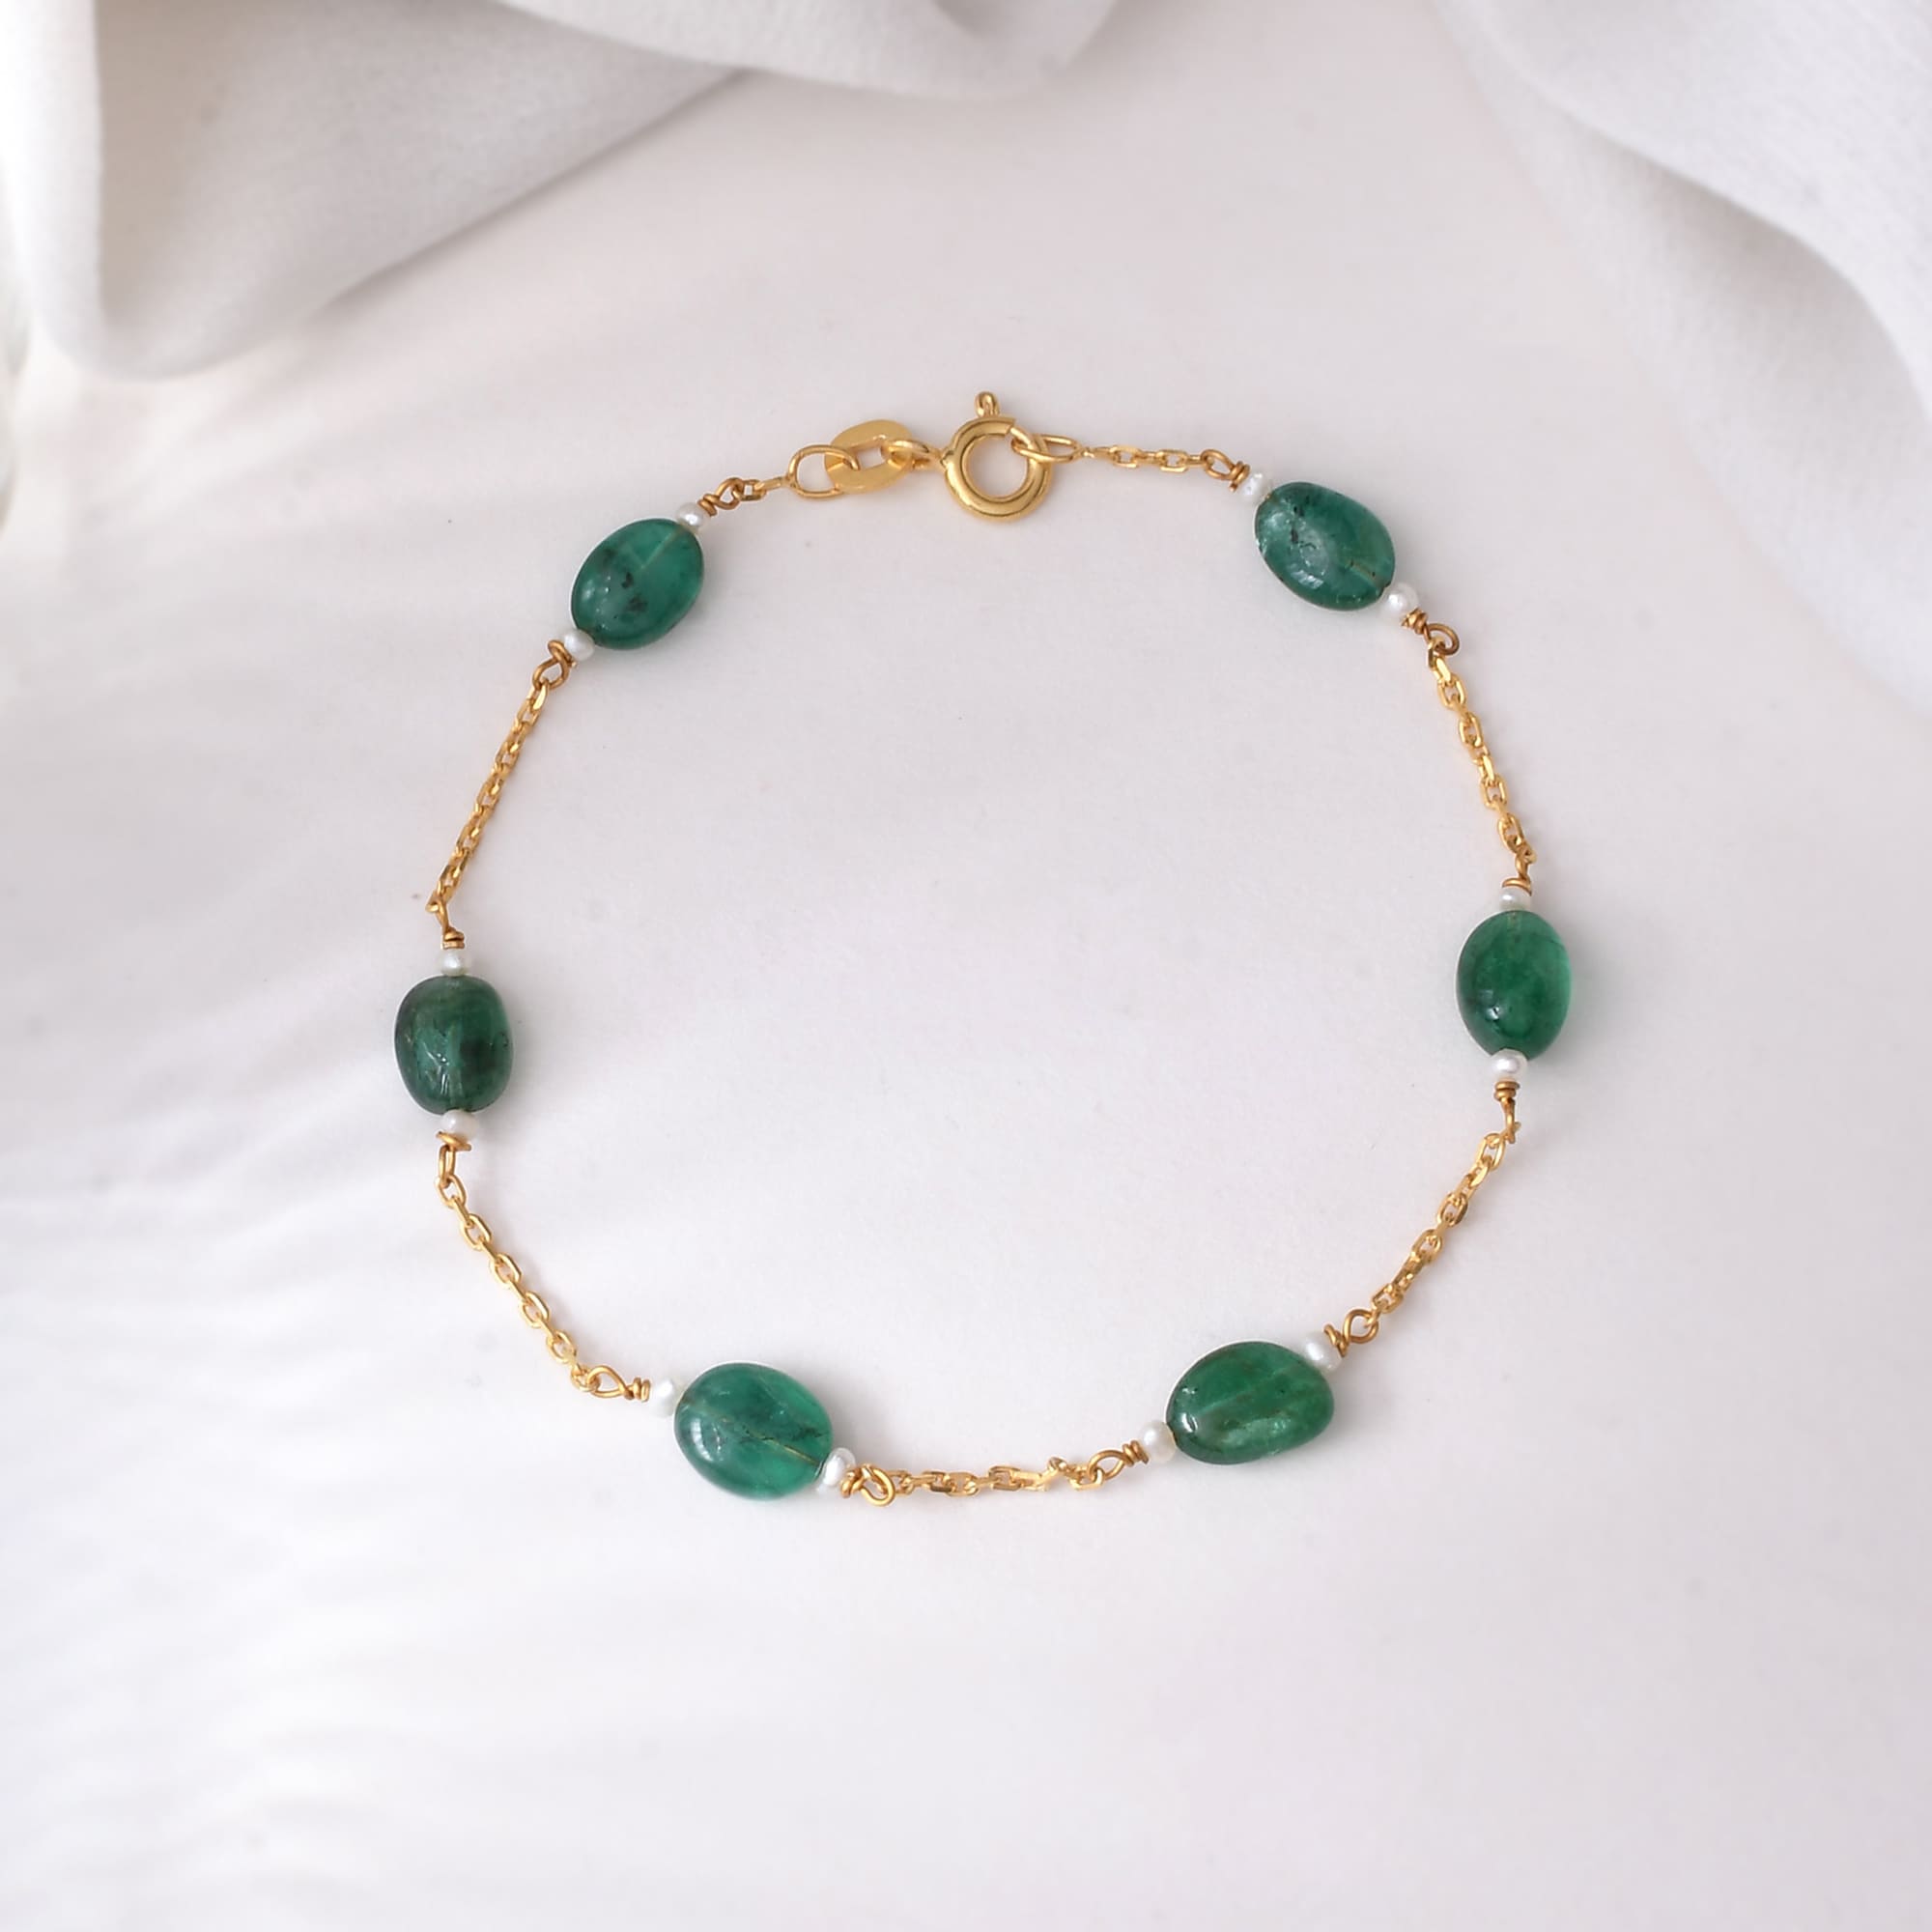 Emerald Bracelet with Small Pearls (22k) (7 inches)